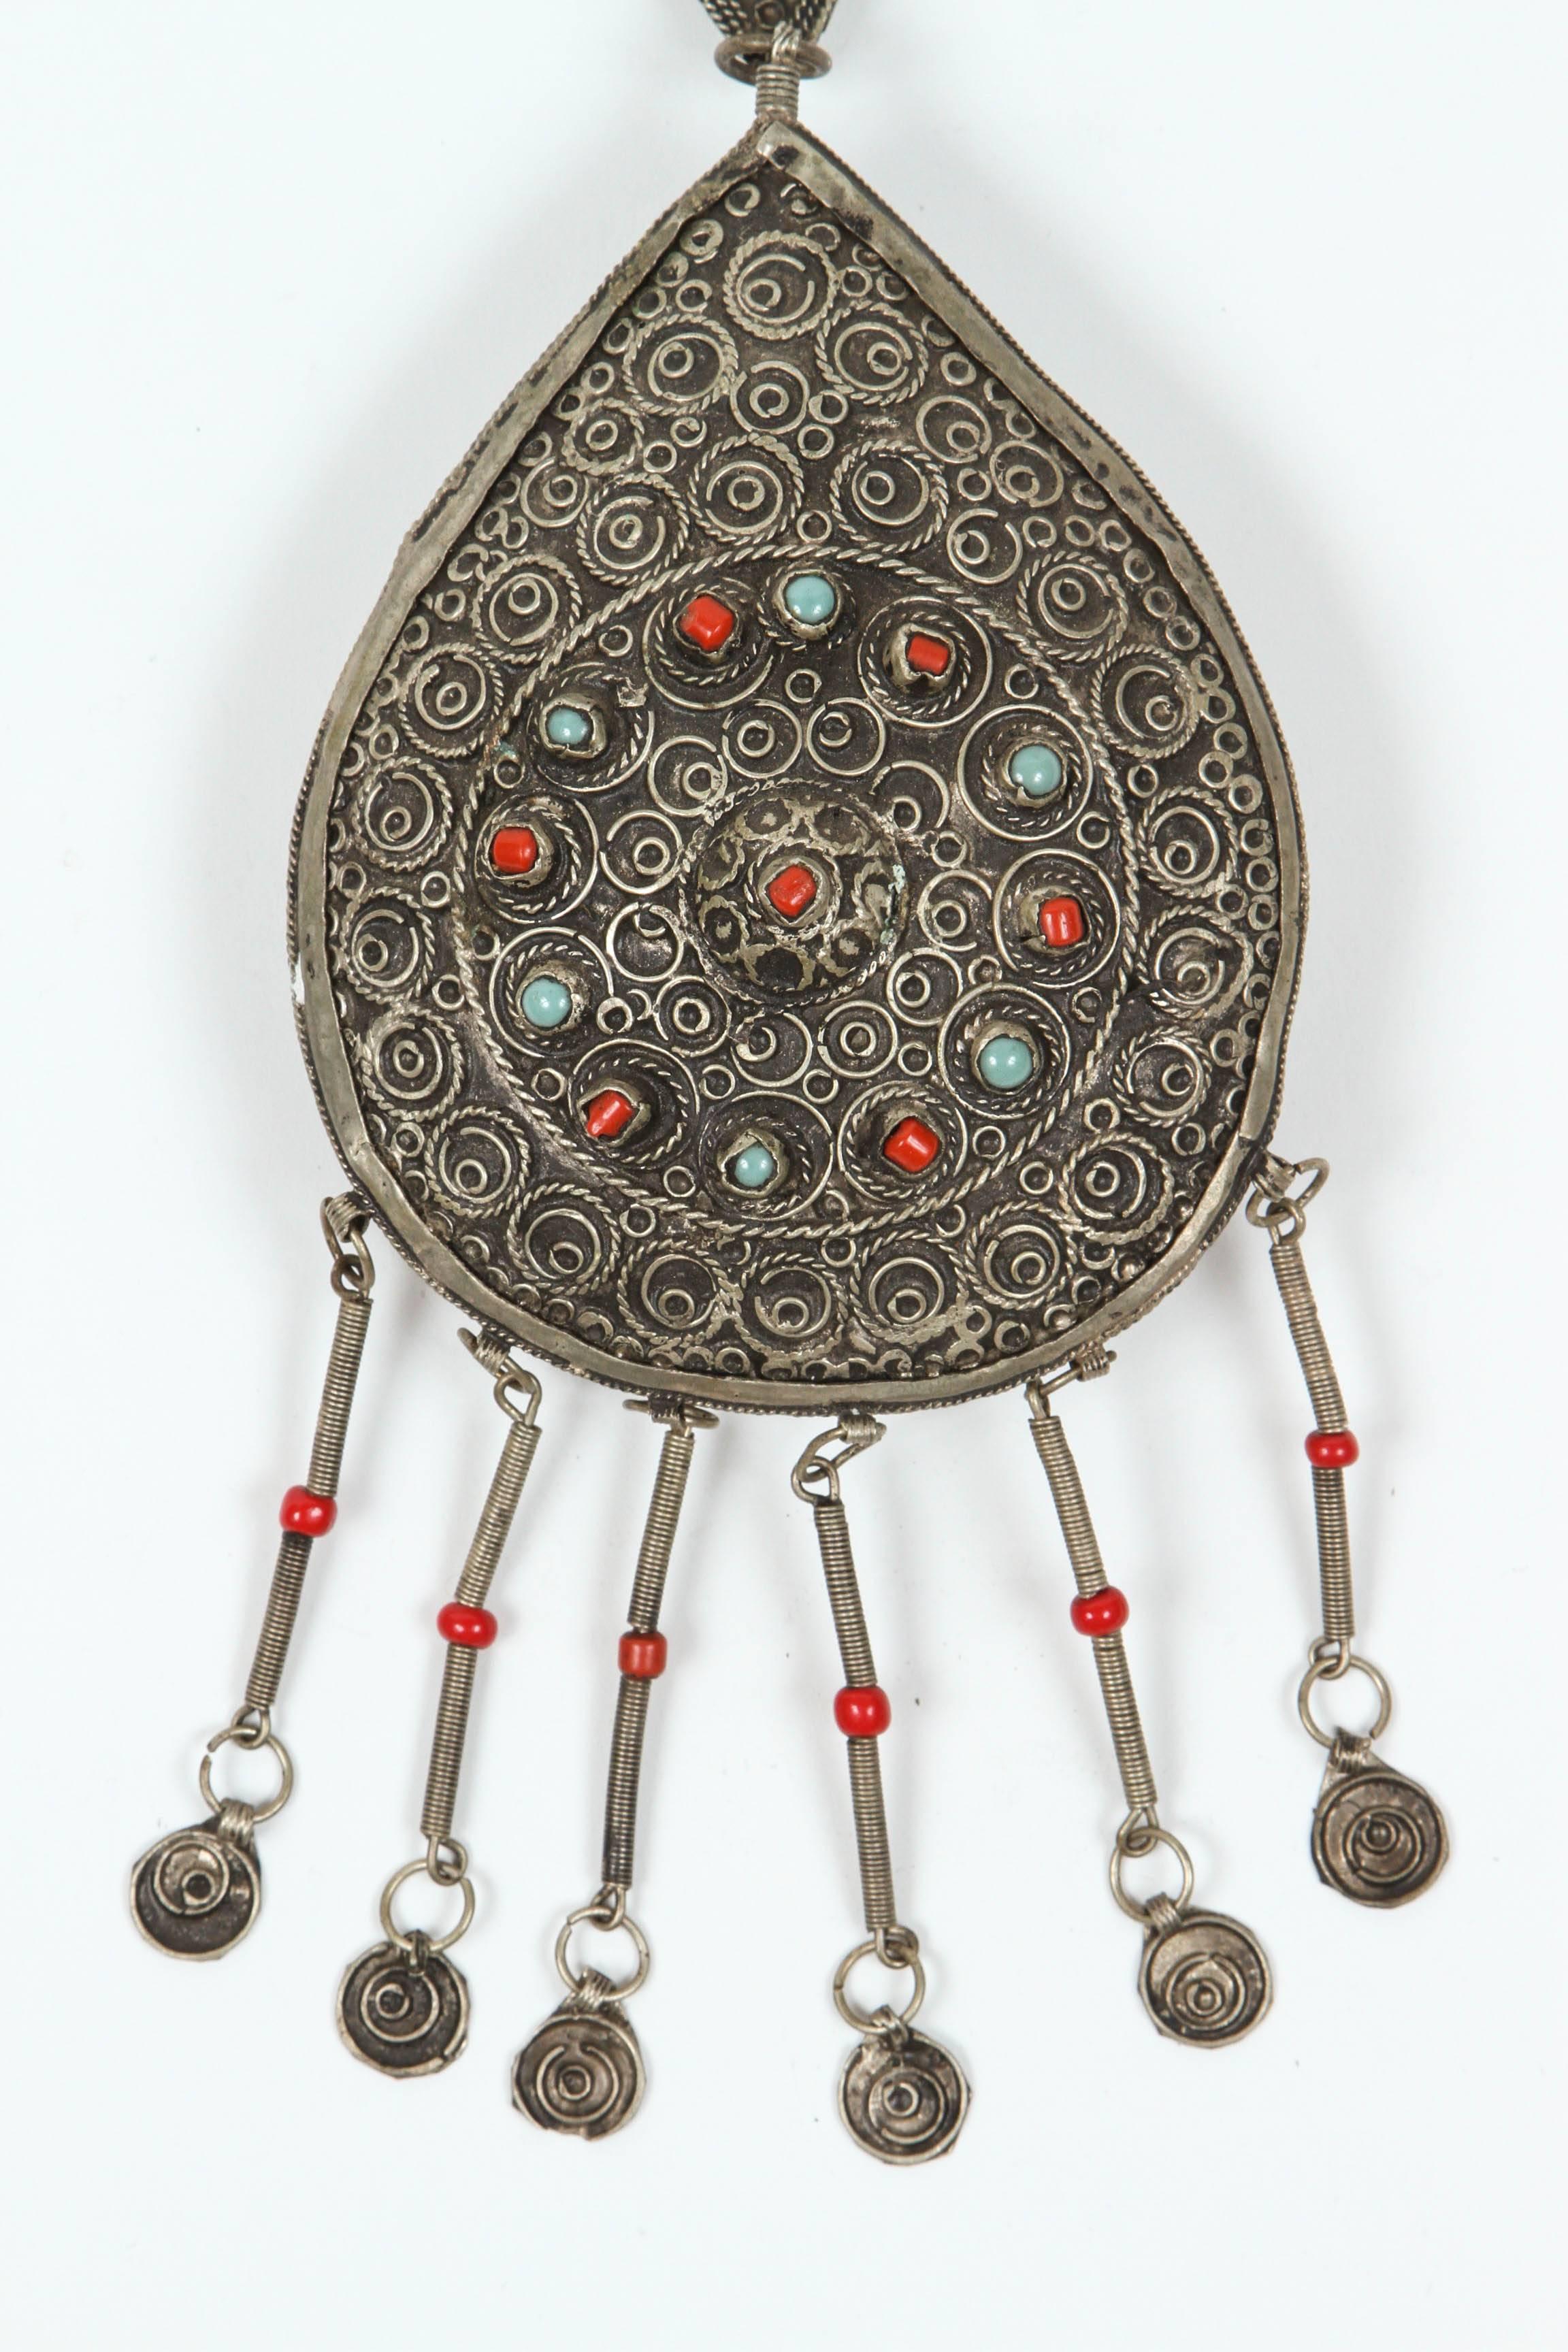 Beautiful vintage Moroccan fibula.
Berber ethnic fibula used to close a woman's cape.
Nice ethnic artwork with filigree Moroccan silver and adorned with glass beads.
A vintage Moroccan fibula is an exquisite piece of jewelry with a rich cultural and